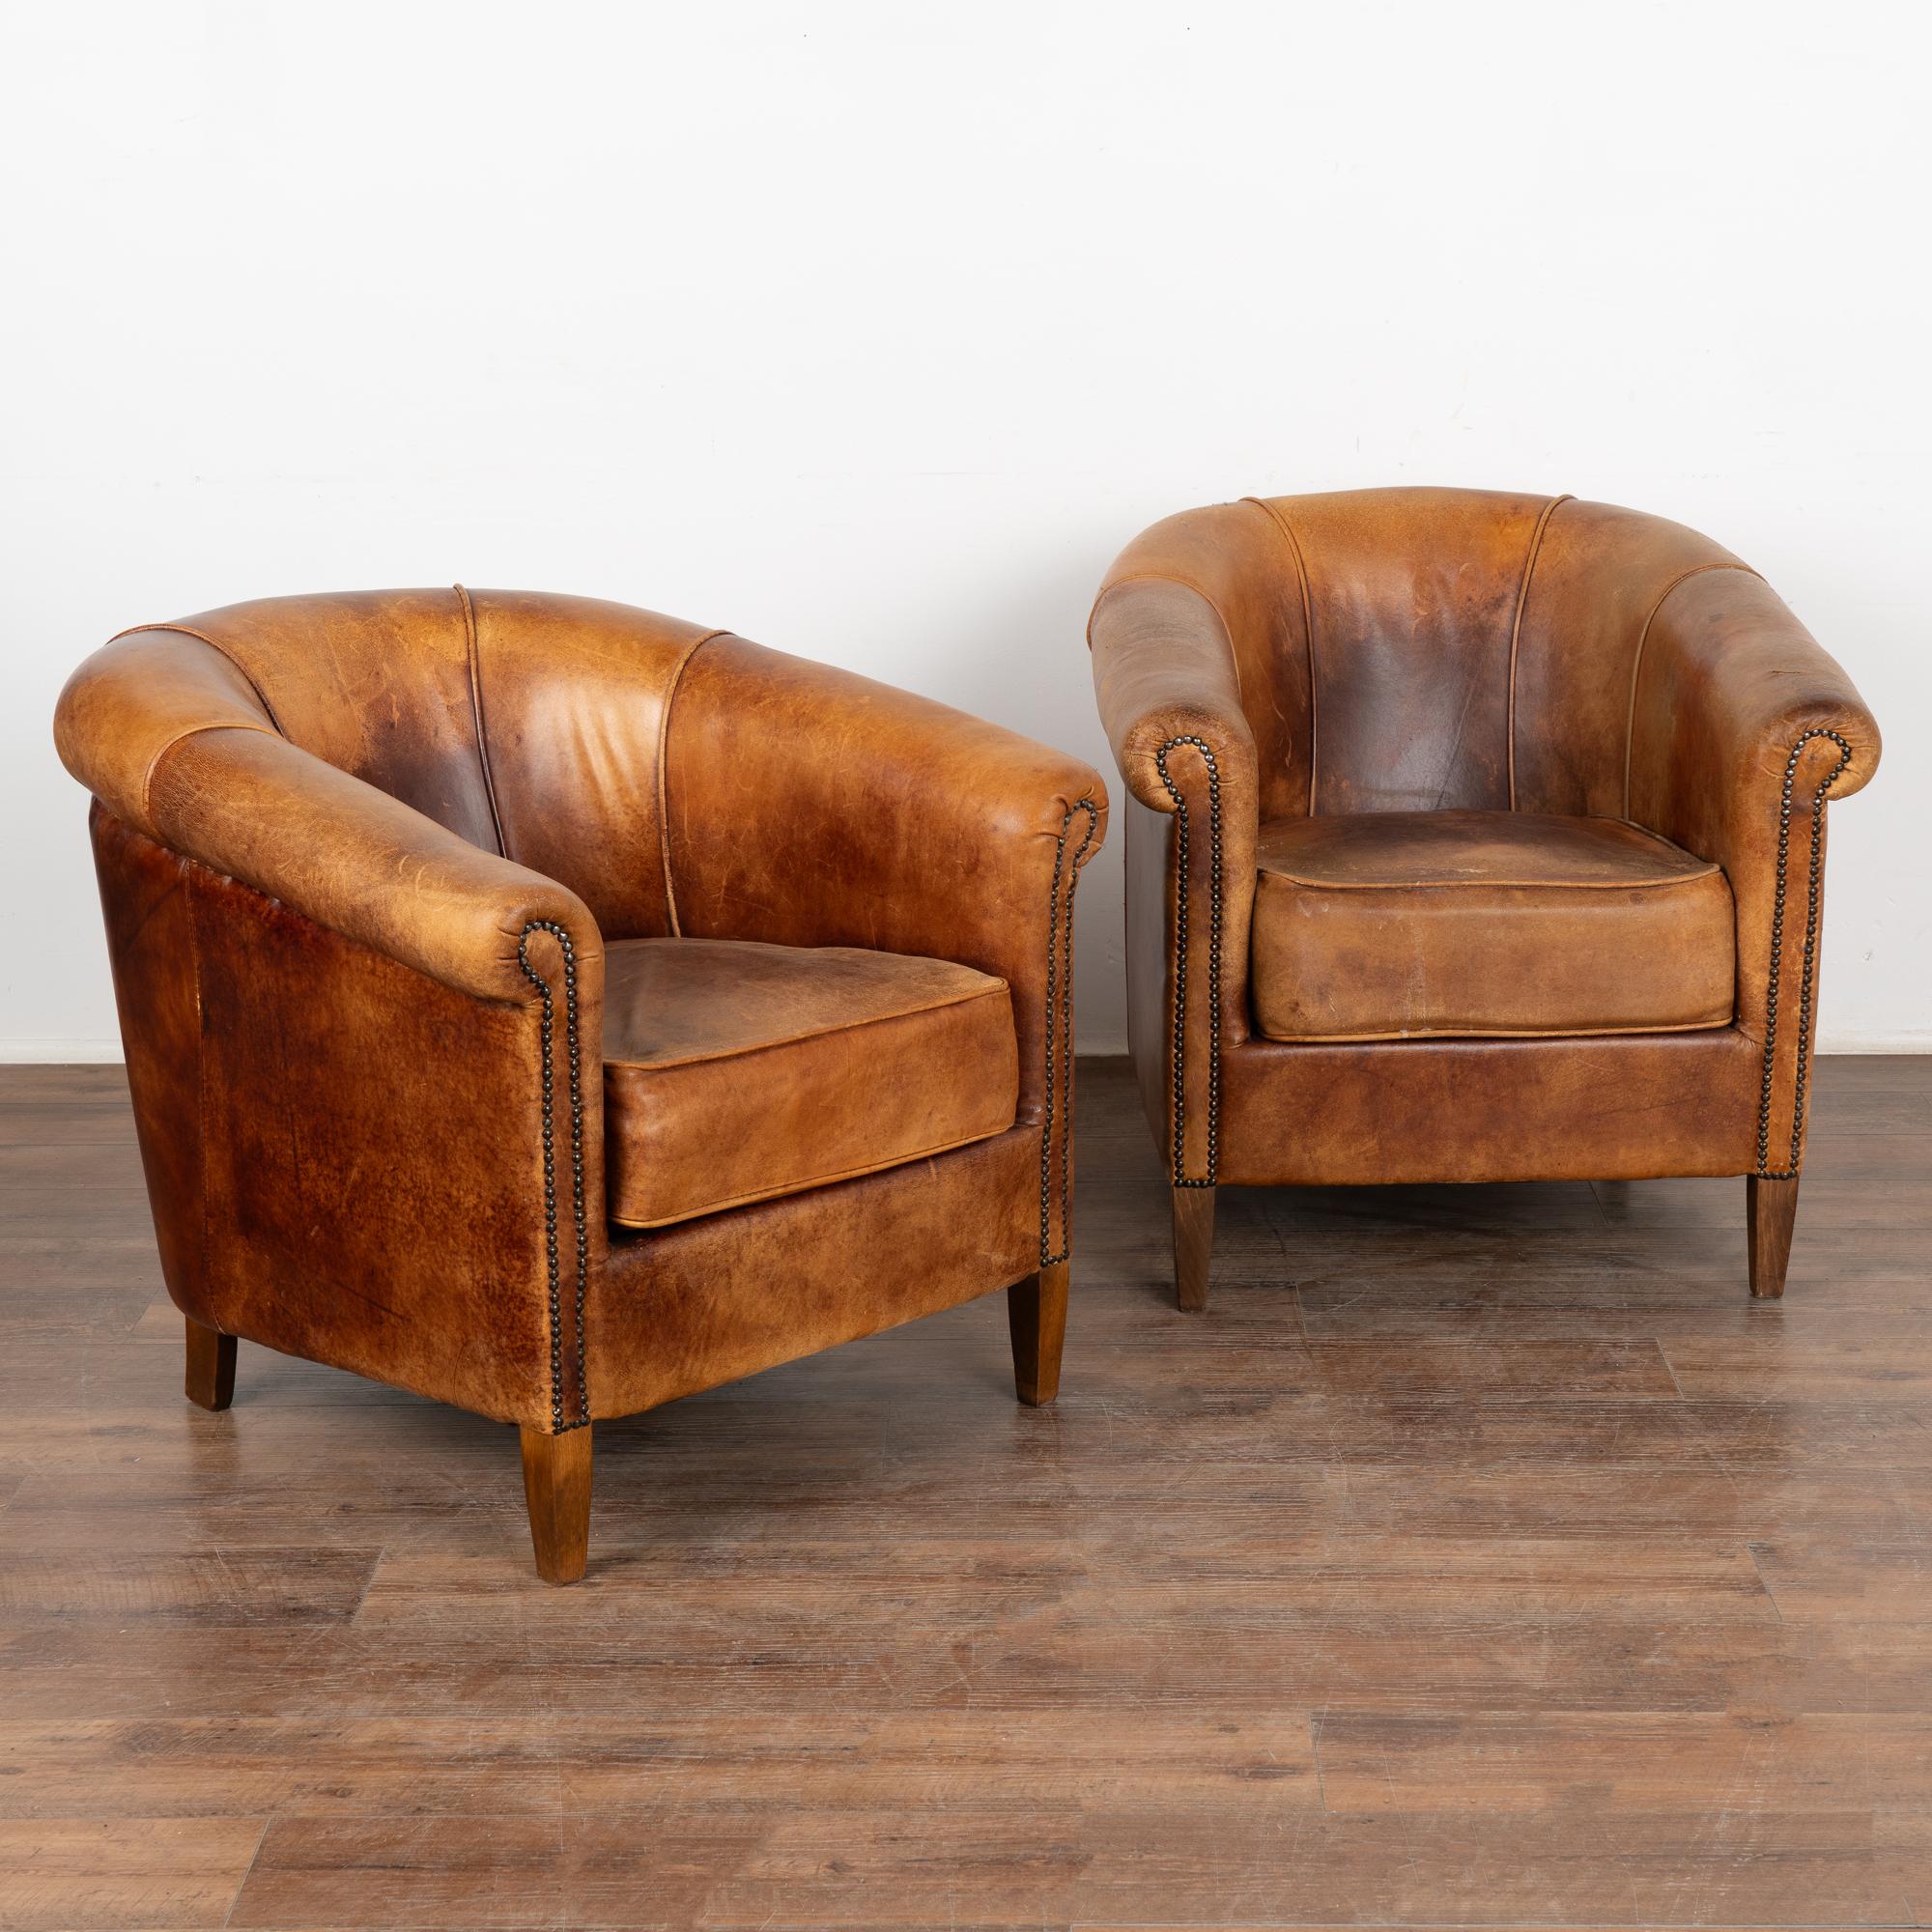 Pair, brown leather tub club chairs with hard wood legs.
Upholstered in vintage brown leather with rich patina, slender rolled arms with nail head trim.
Sold in original vintage condition; solid/stable and sits comfortably snug. Typical age related